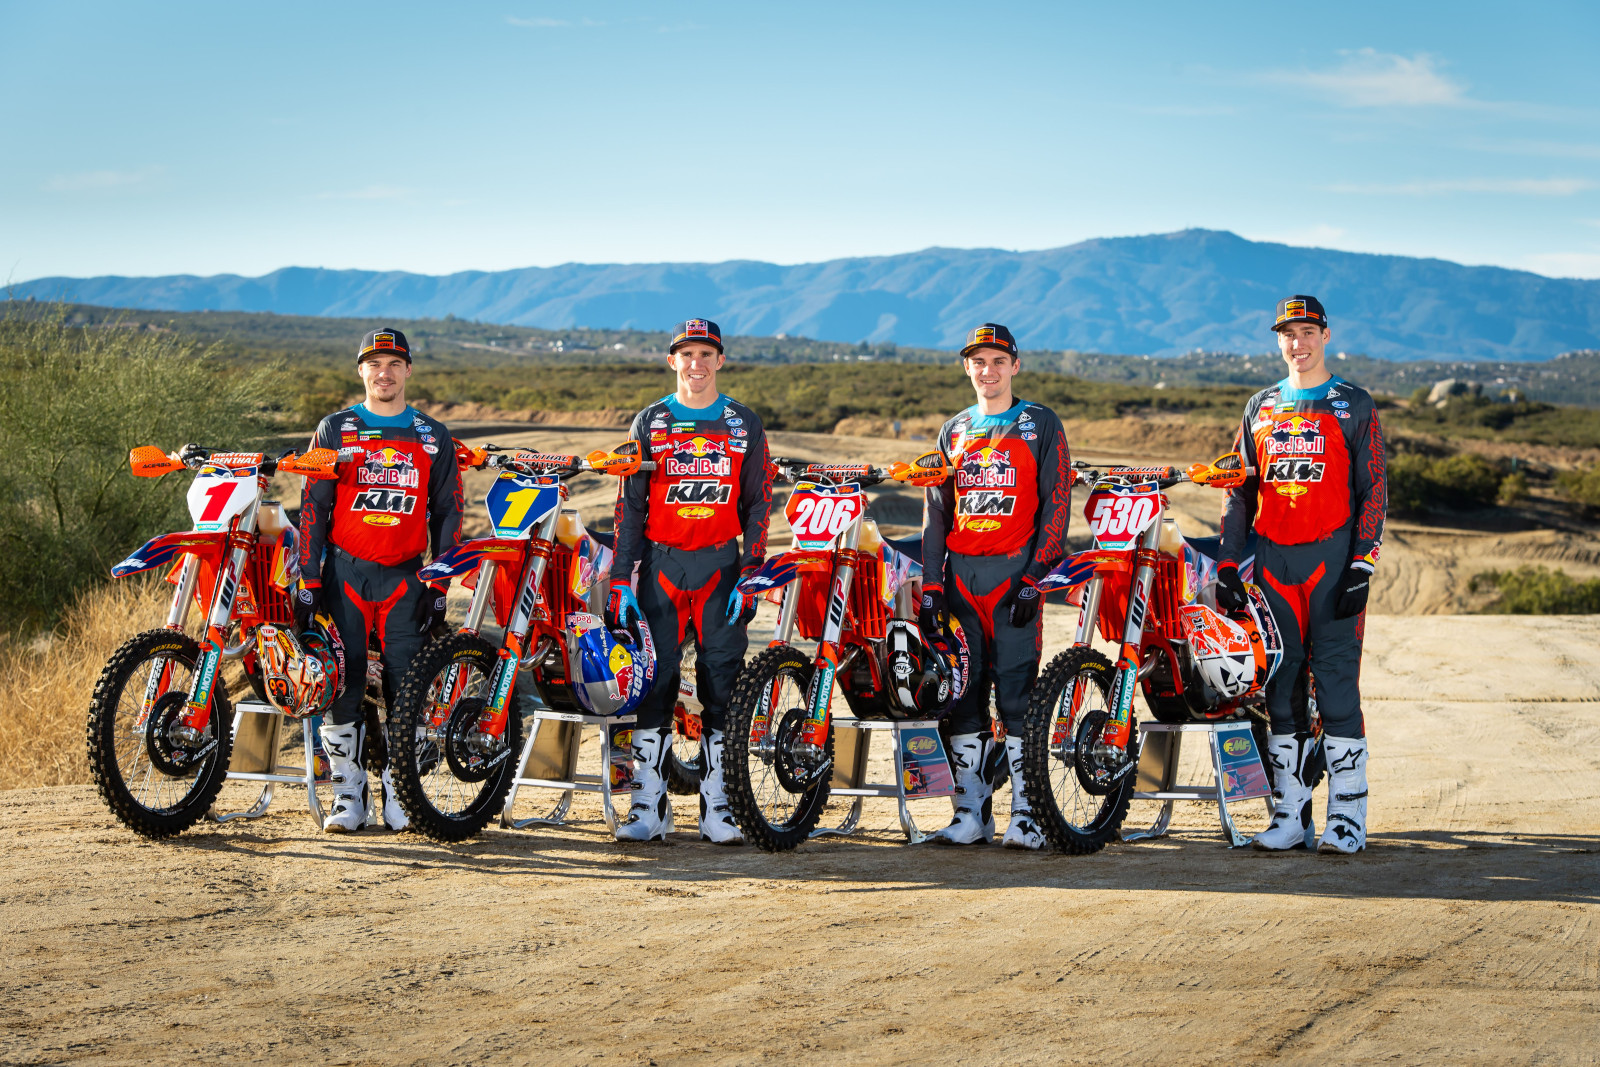 Lettenbichler joins U.S. KTM Factory Racing Team for select races in 2020 